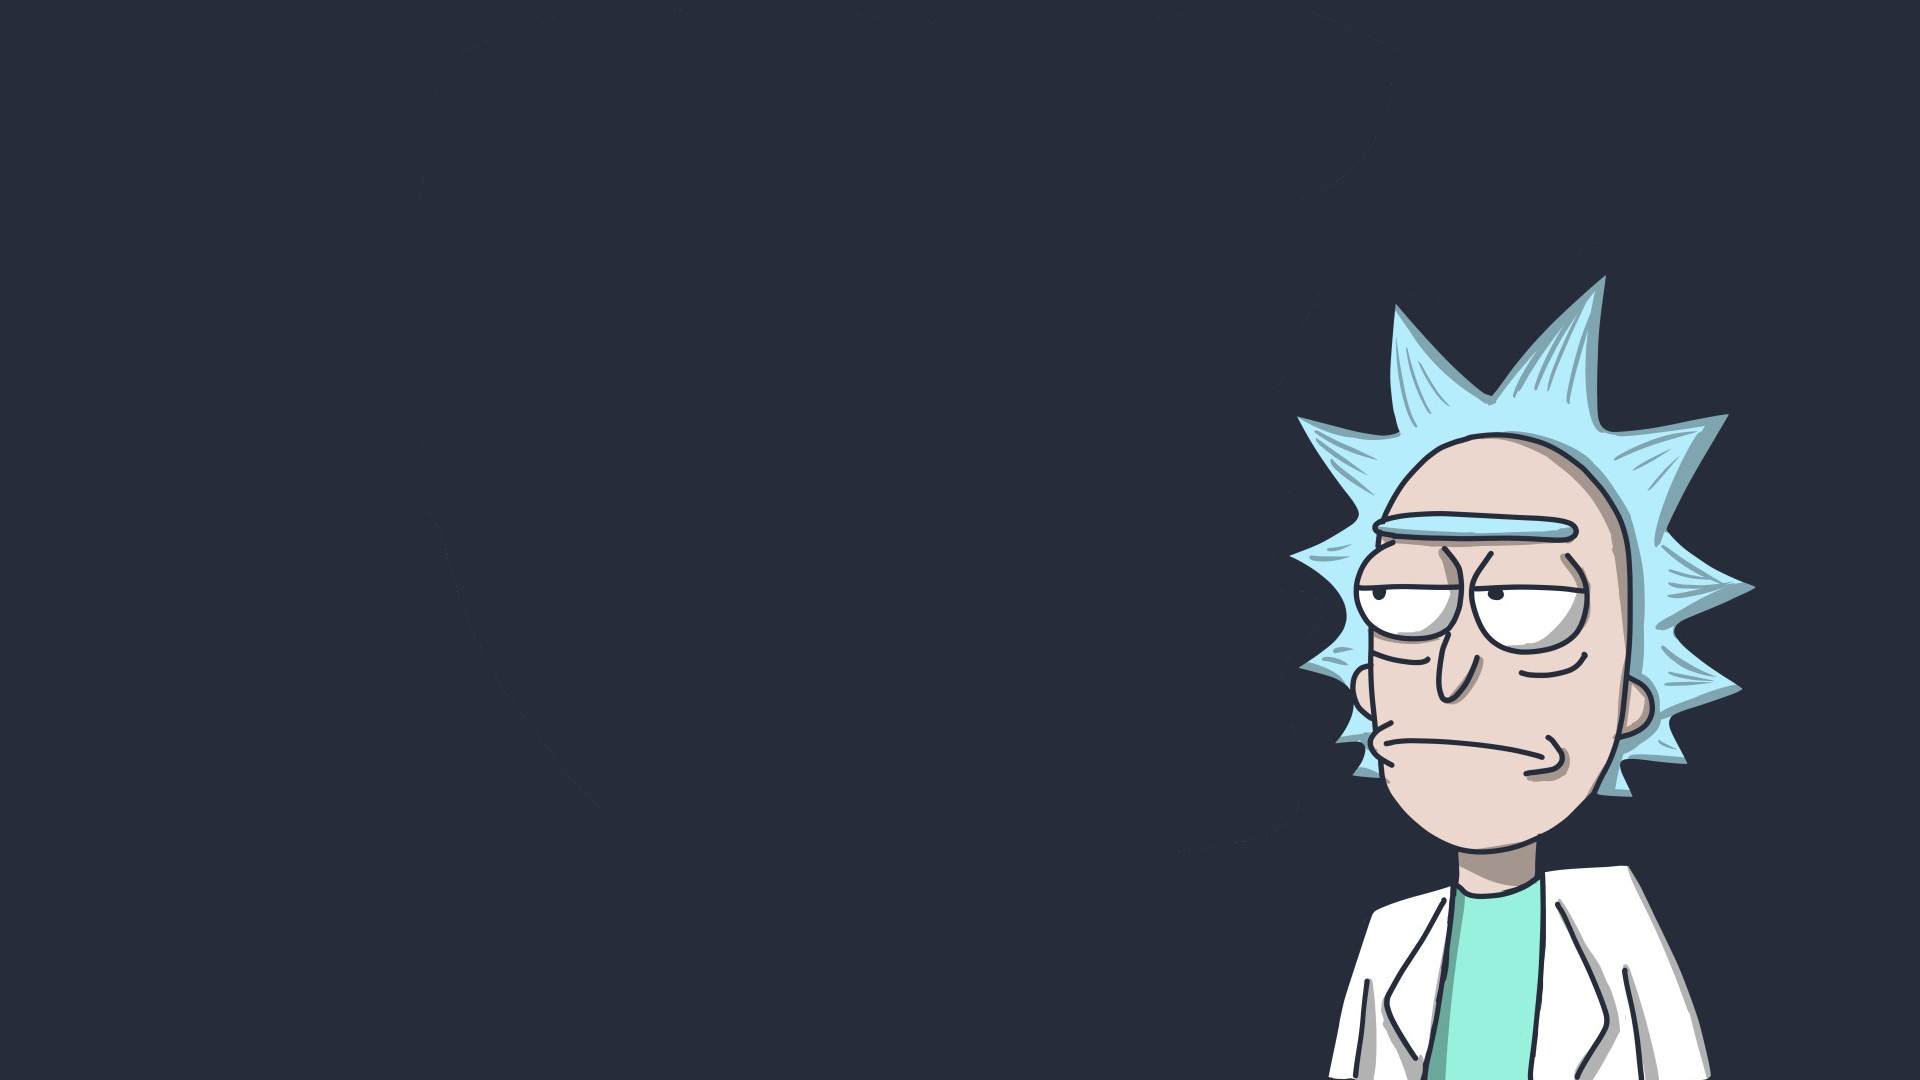 Computer Wallpapers Rick and Morty Rick with image resolution 1920x1080 pixel. You can use this wallpaper as background for your desktop Computer Screensavers, Android or iPhone smartphones